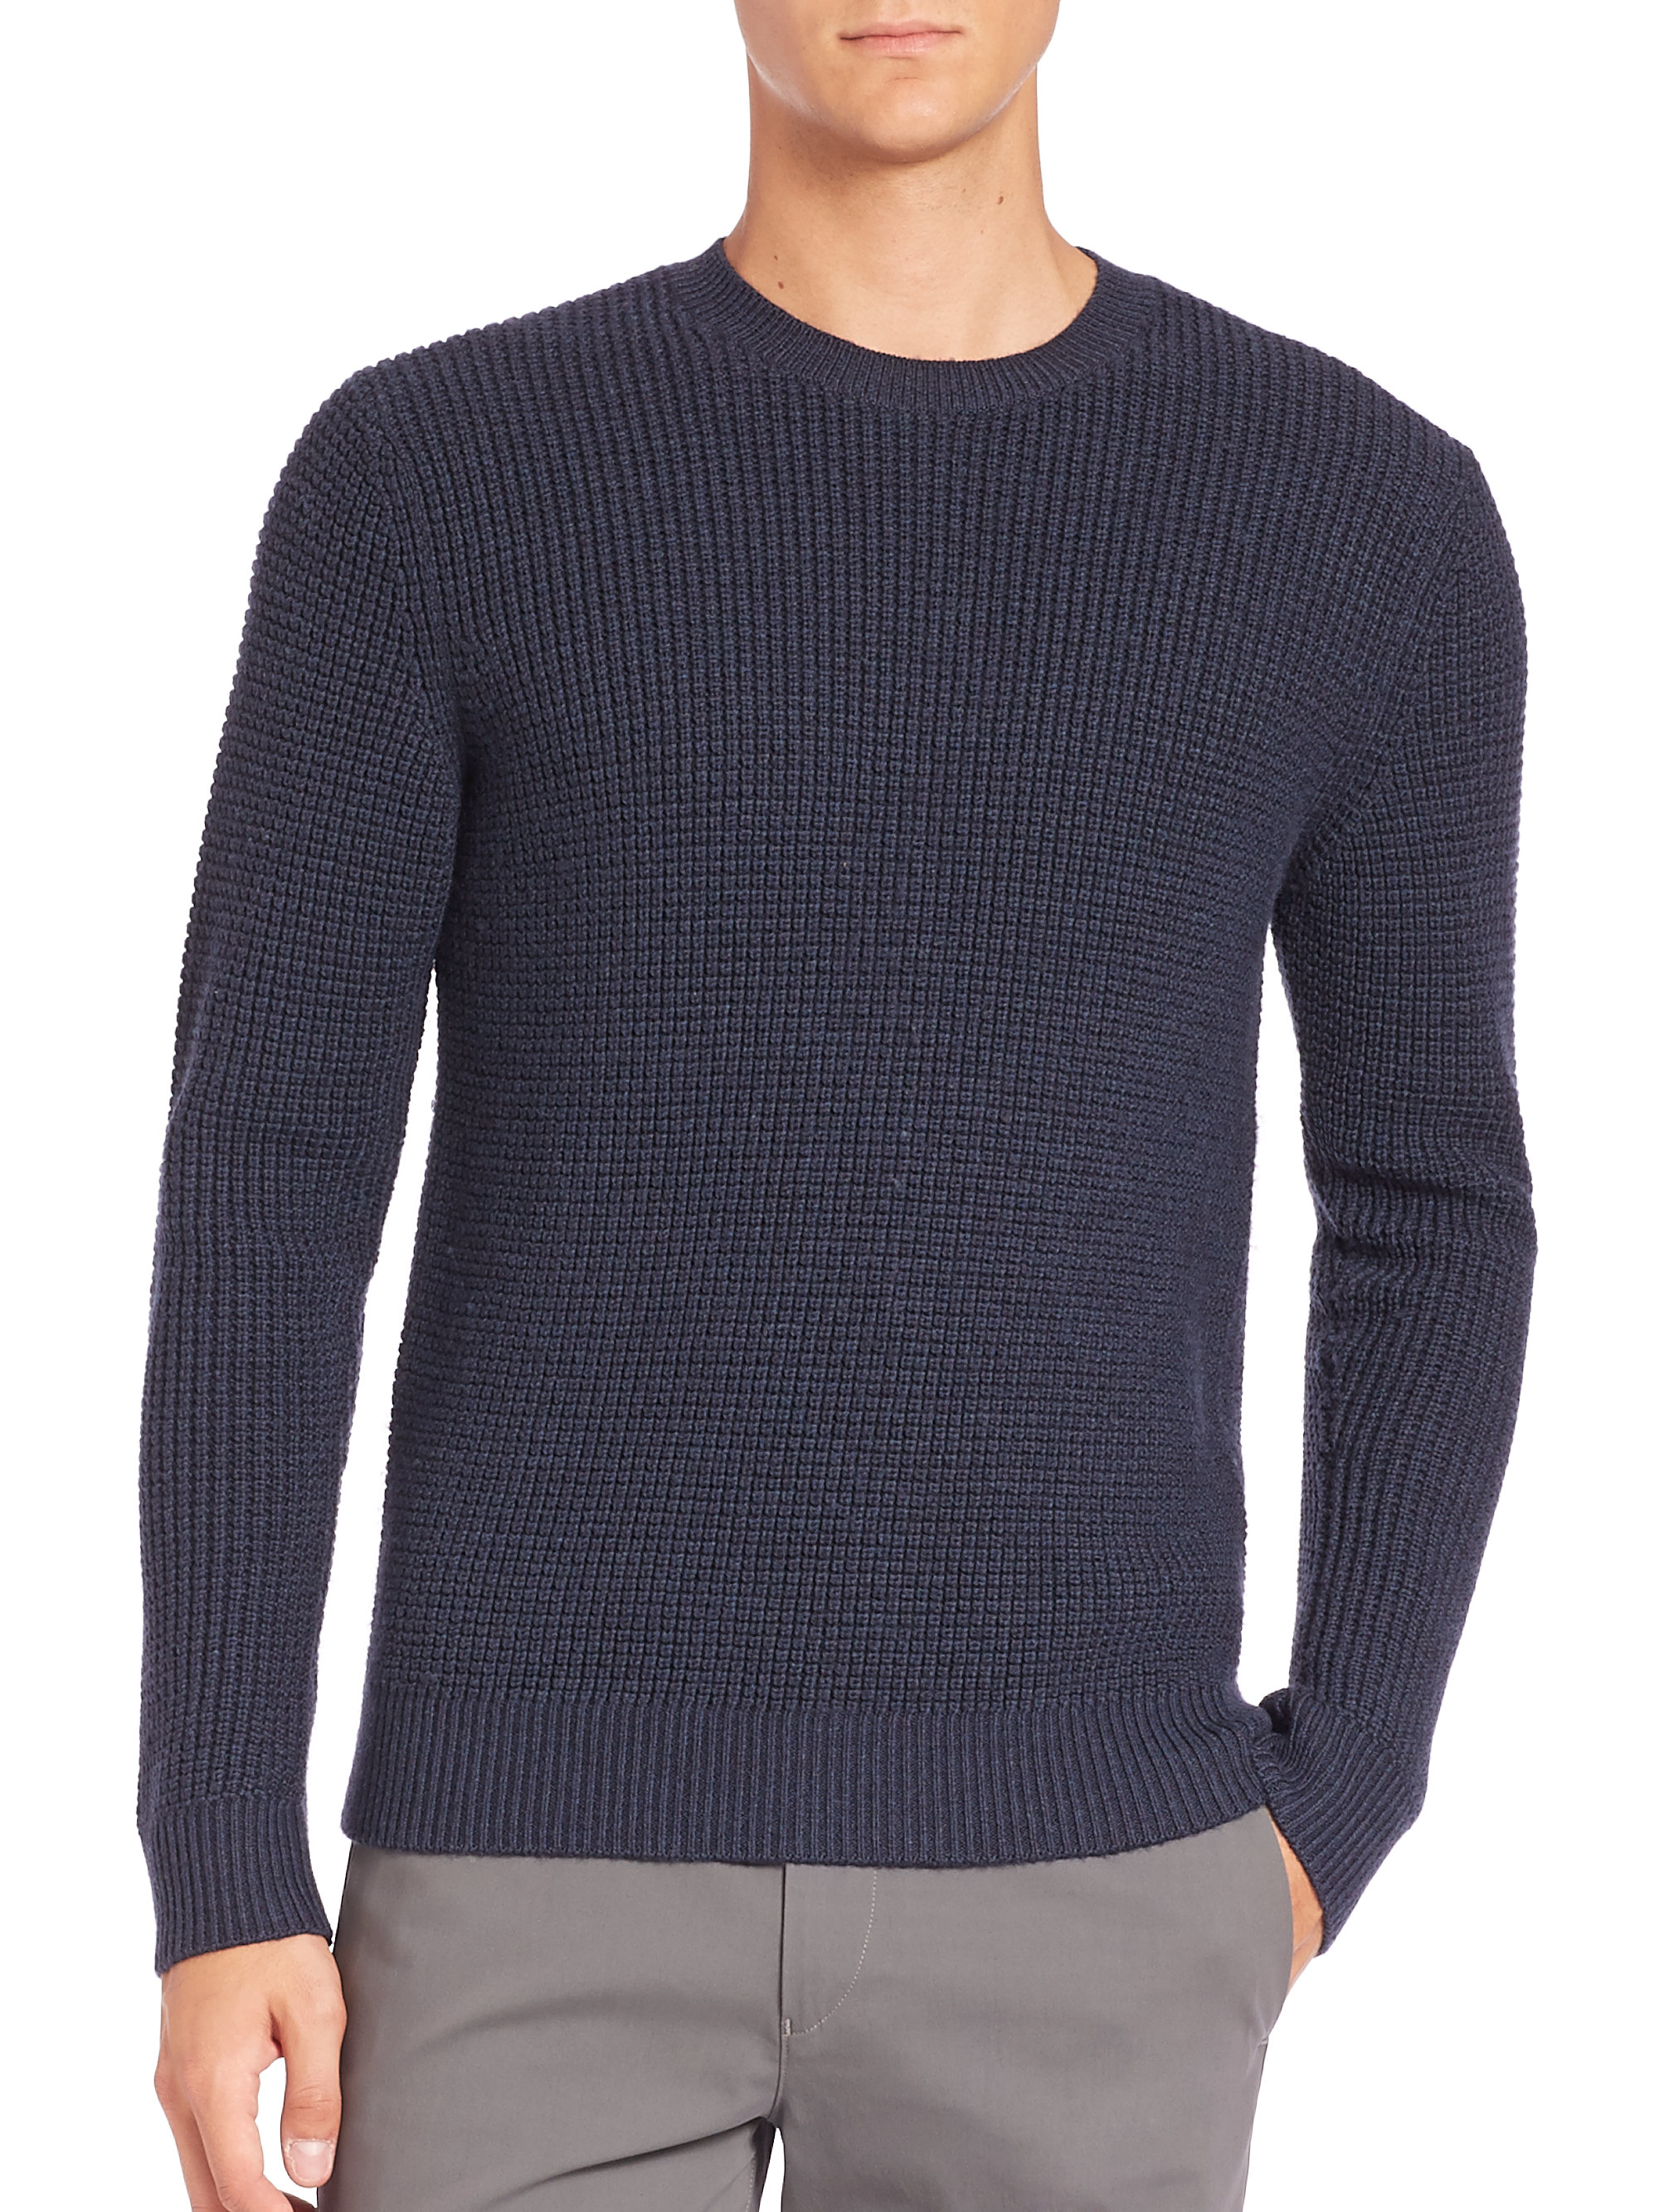 Theory Wool Waffle Crewneck Tee in Navy (Blue) for Men - Lyst